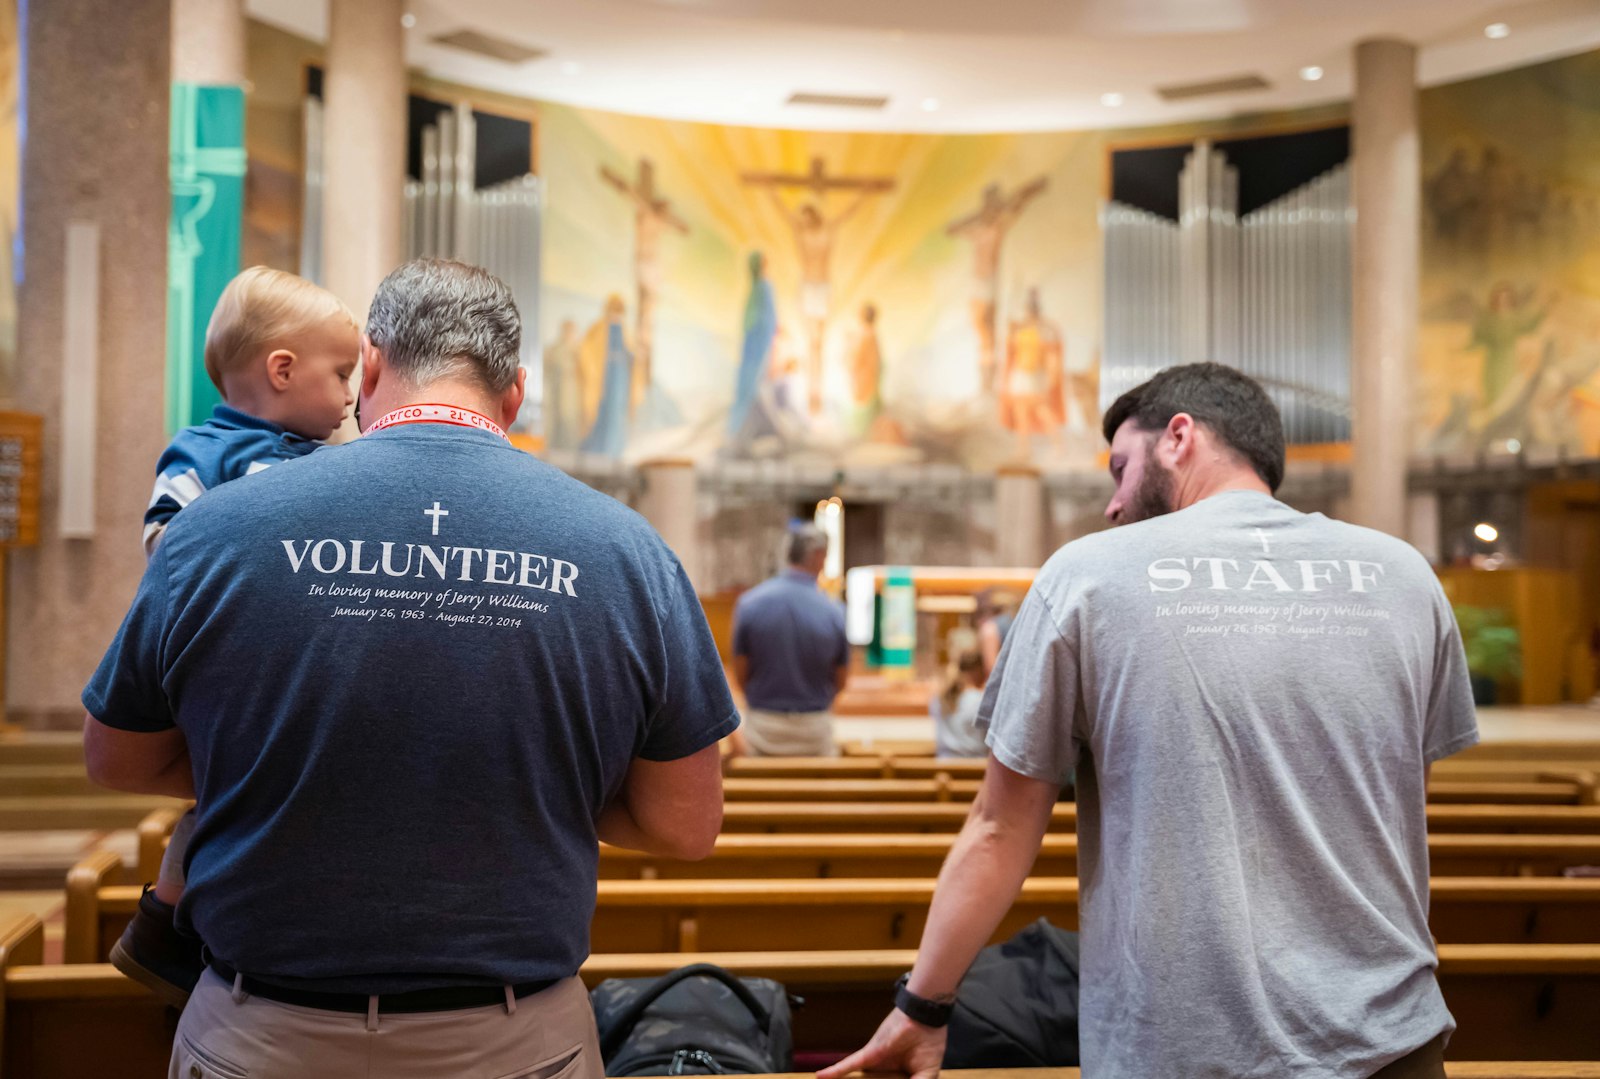 Project Hope of Michigan volunteers stand during Mass at St. Clare of Montefalco Parish in Grosse Pointe Park on Aug. 28. Amy Fox, who began Project Hope in 2014 in honor of her late uncle, Jerry Williams, said she's happy to see the parish embrace the effort year after year. (Valaurian Waller | Detroit Catholic)